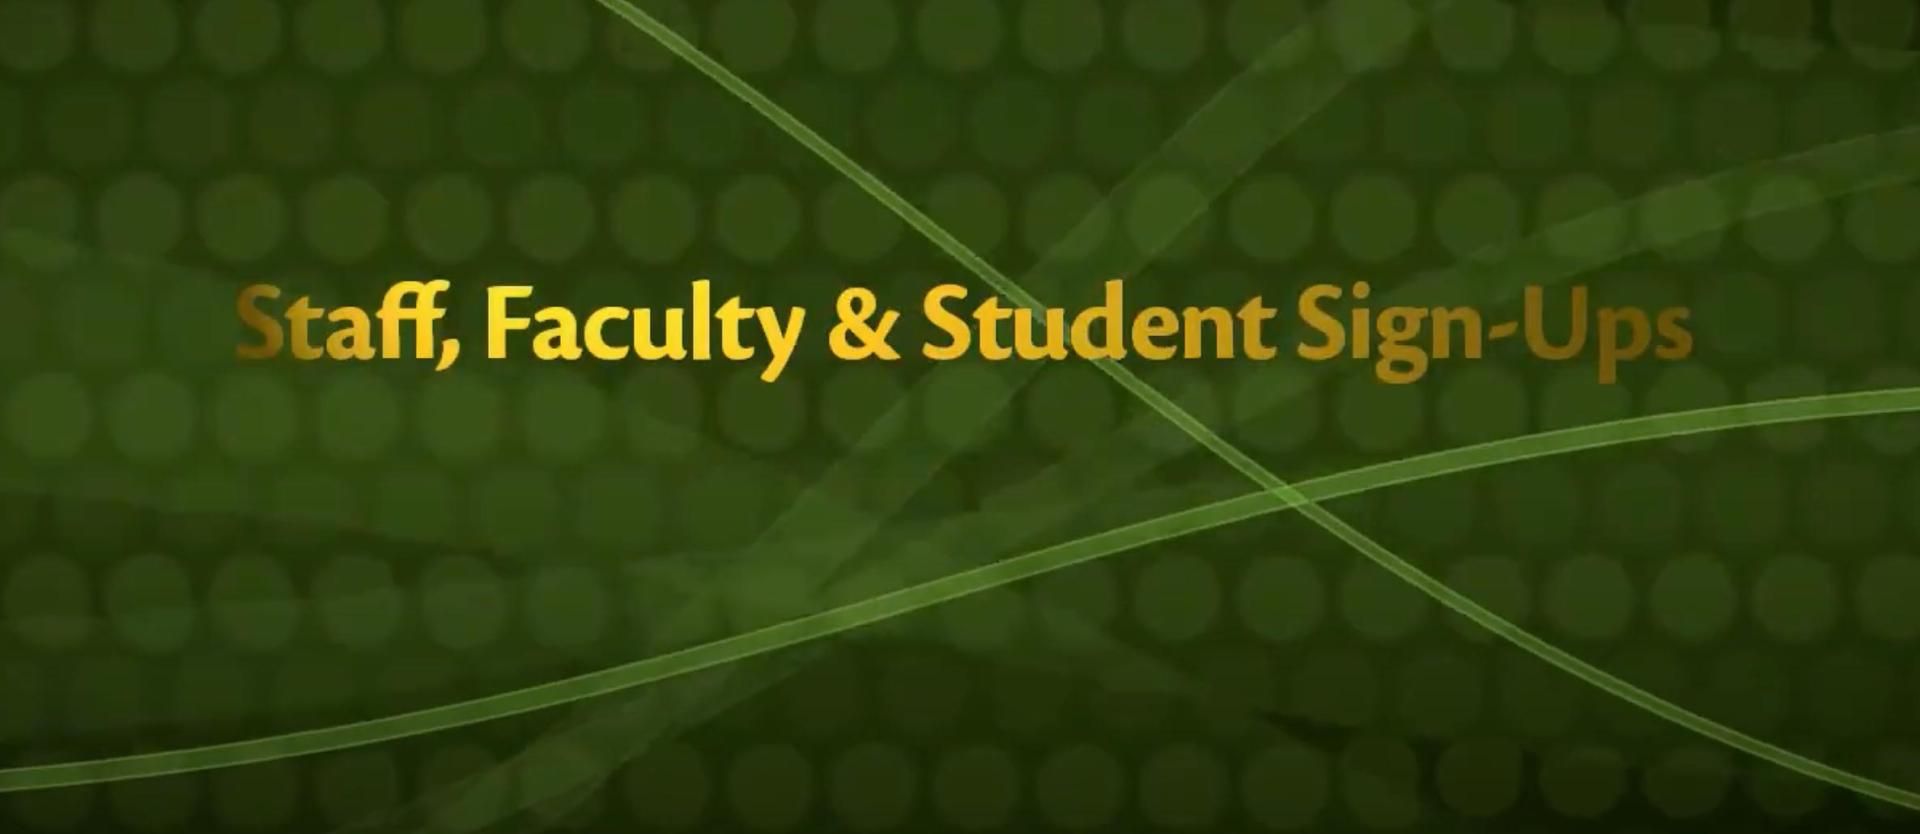 Staff, Faculty & Student Sign-ups